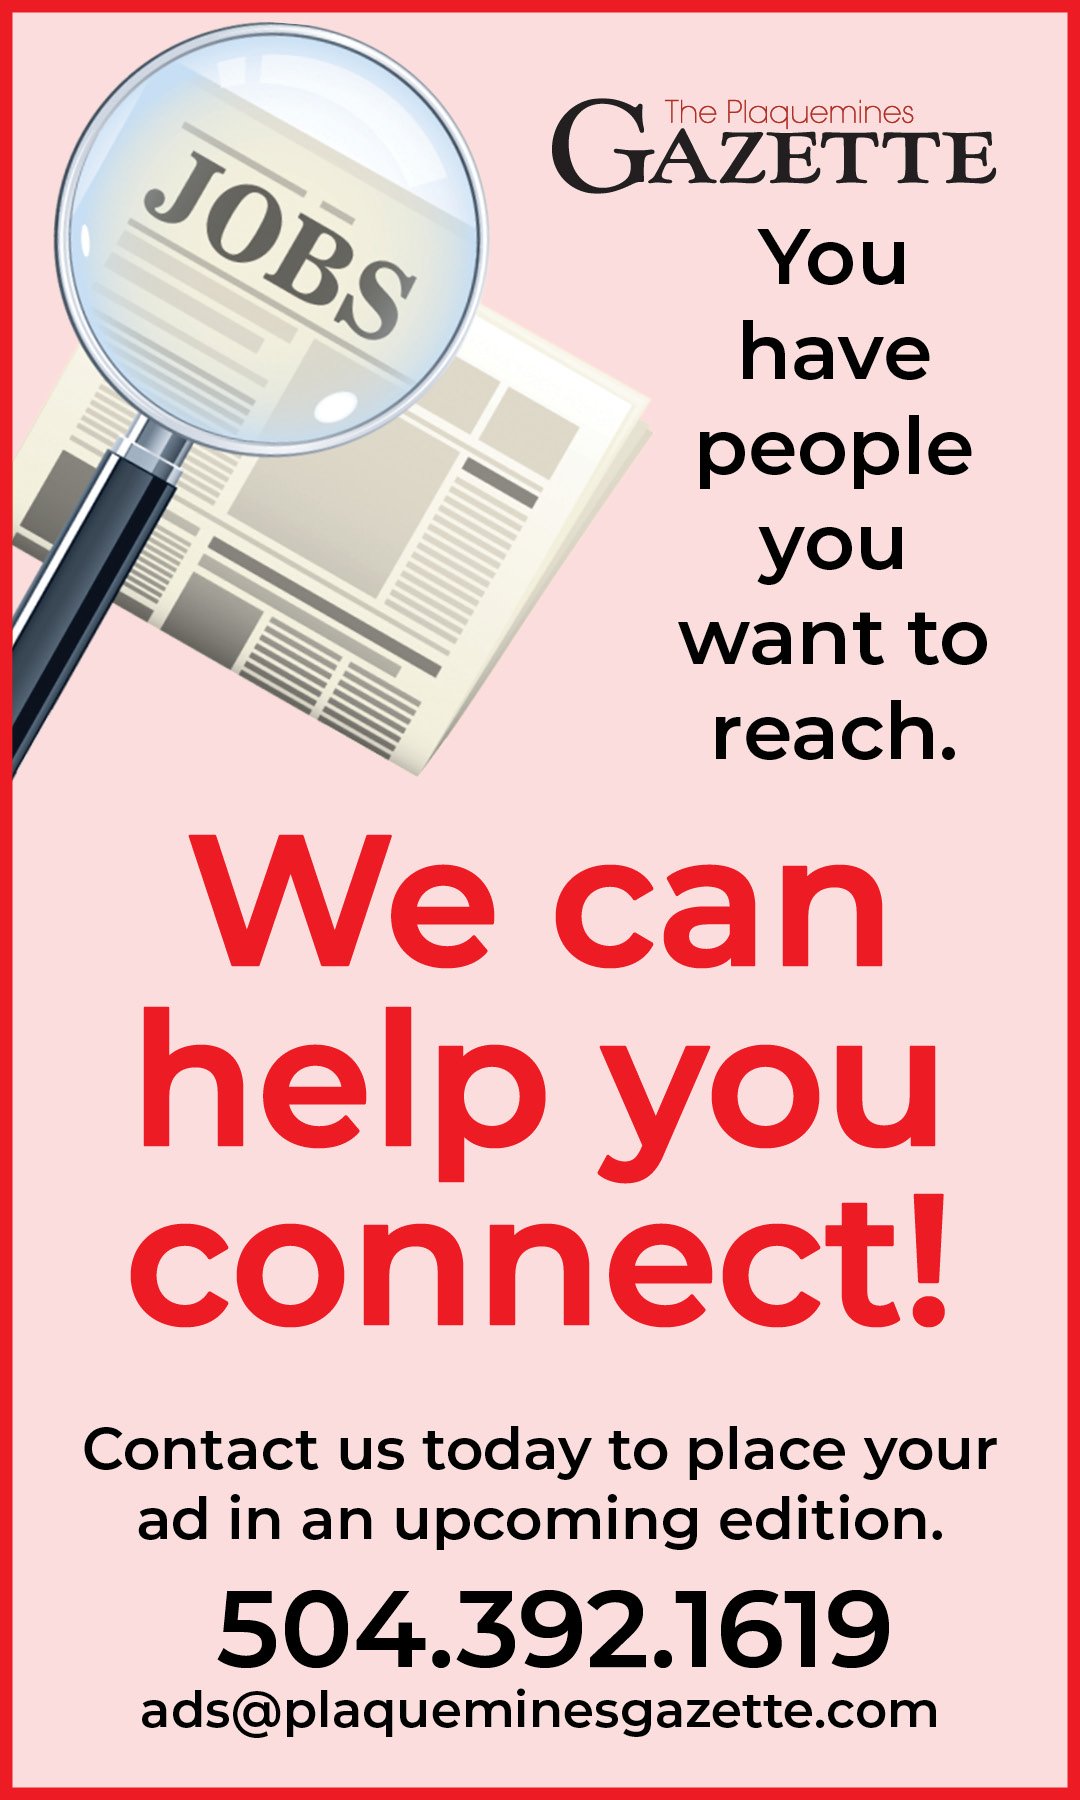 We can help you connect